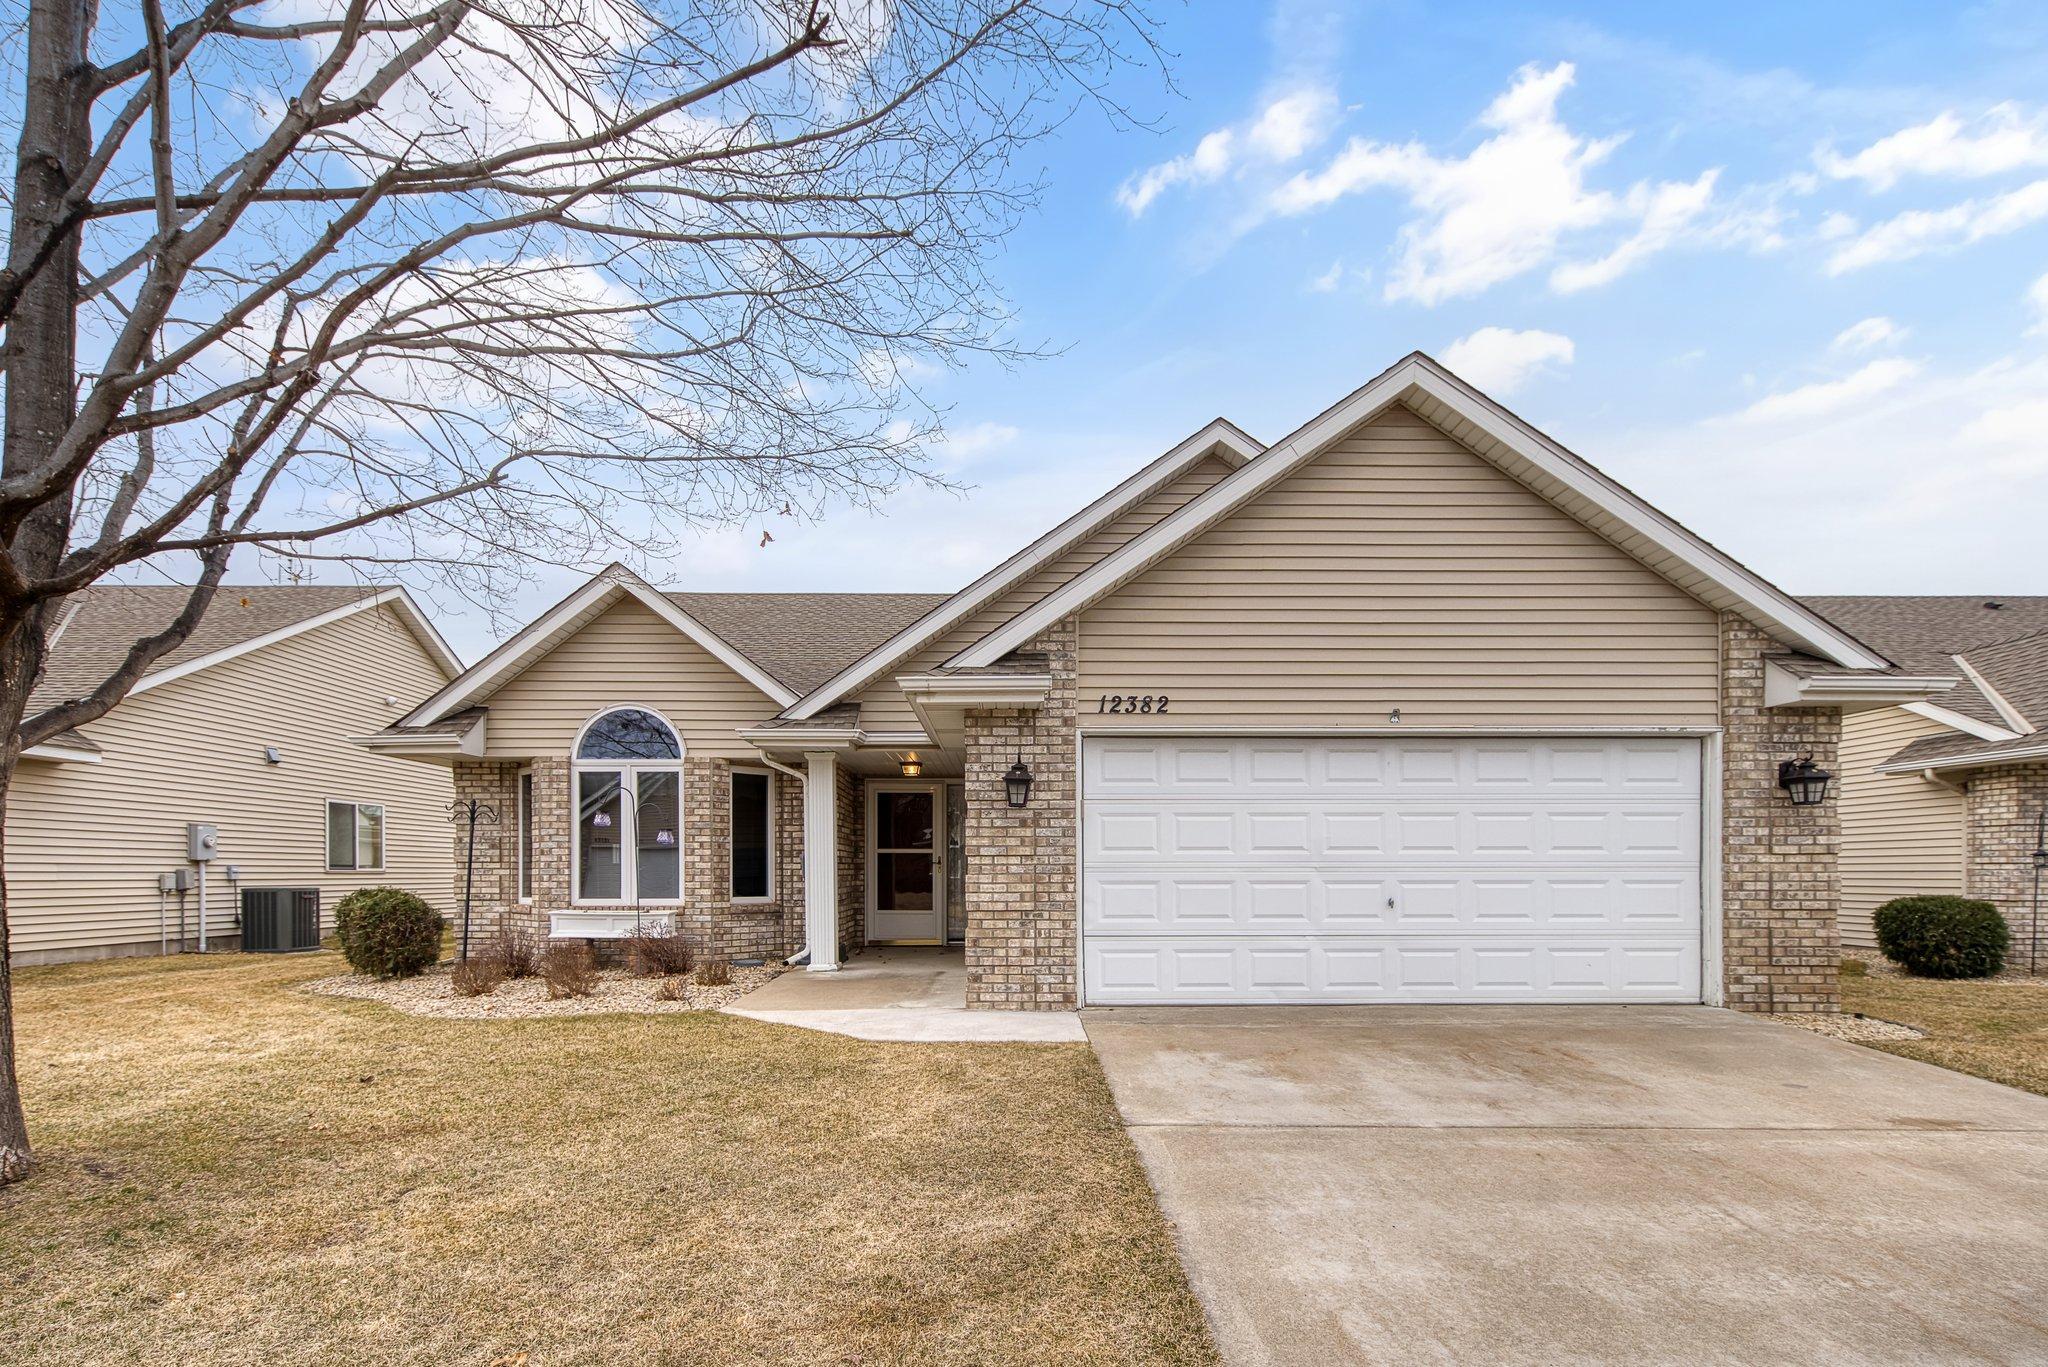 Welcome to 12382 Wedgewood Pl NW, Coon Rapids!